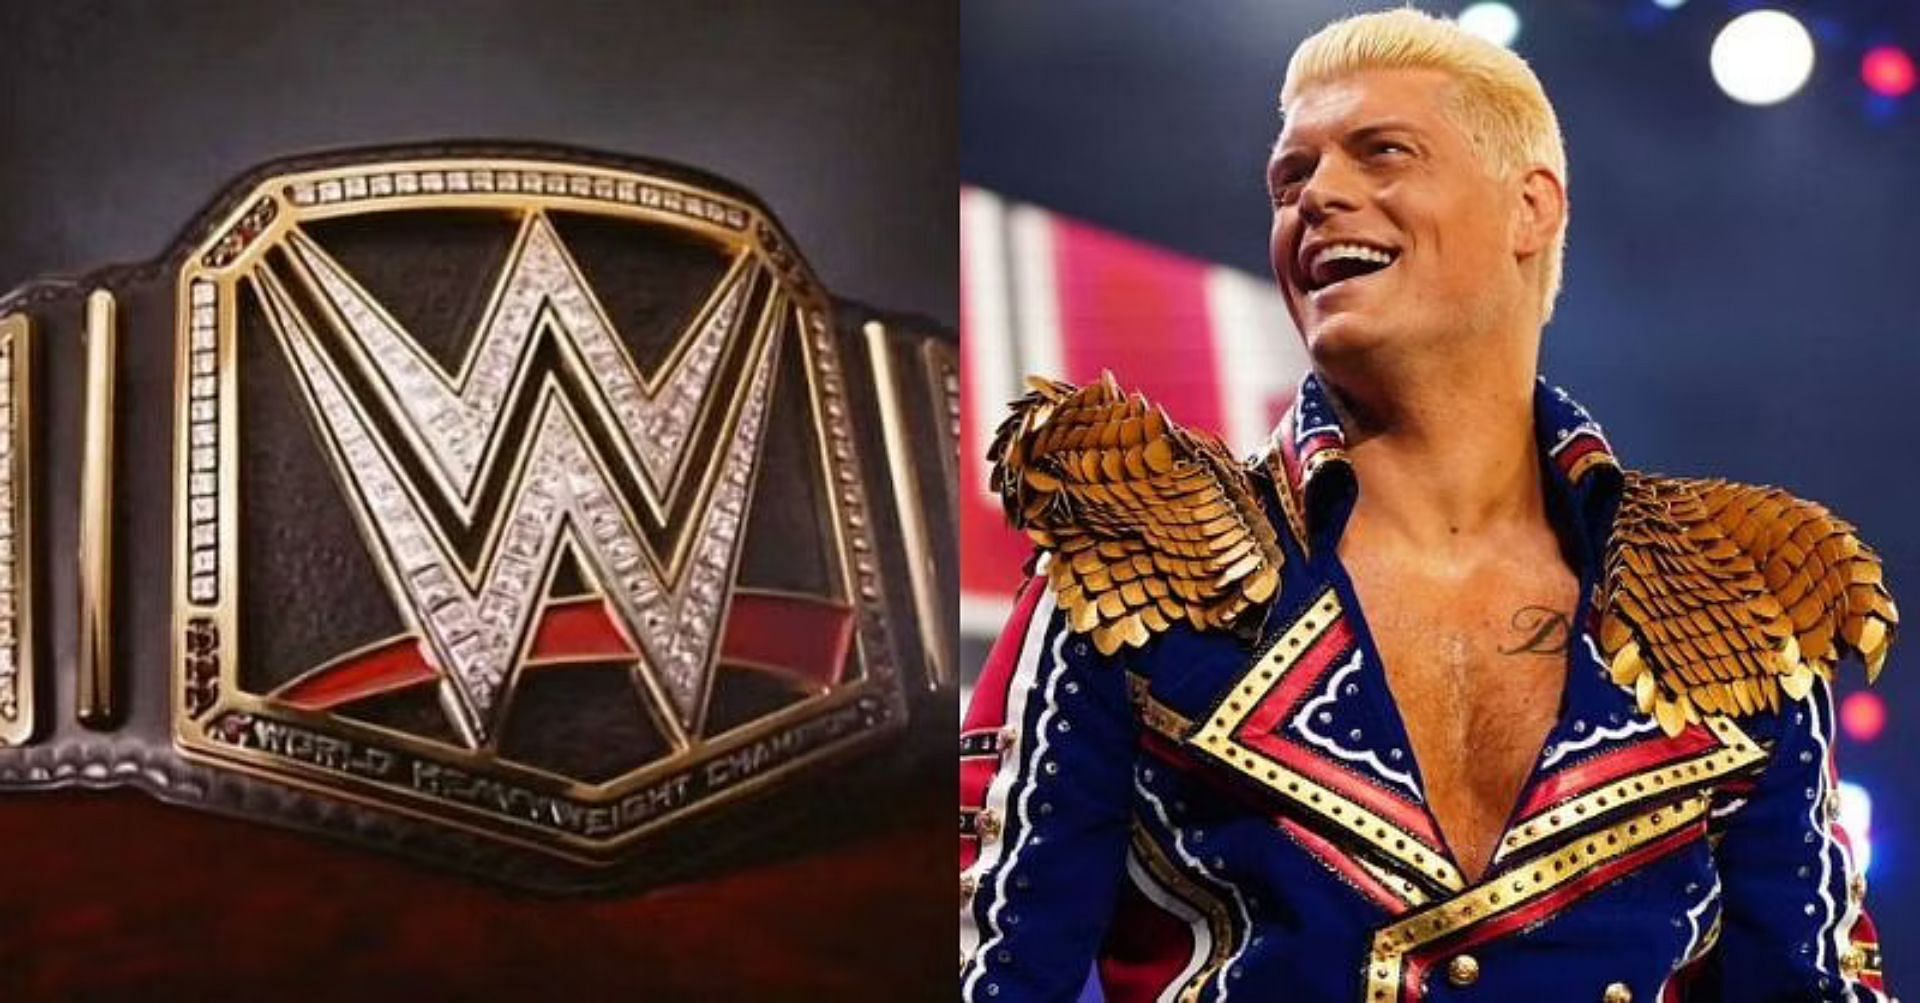 Cody Rhodes wants to win a world title in WWE